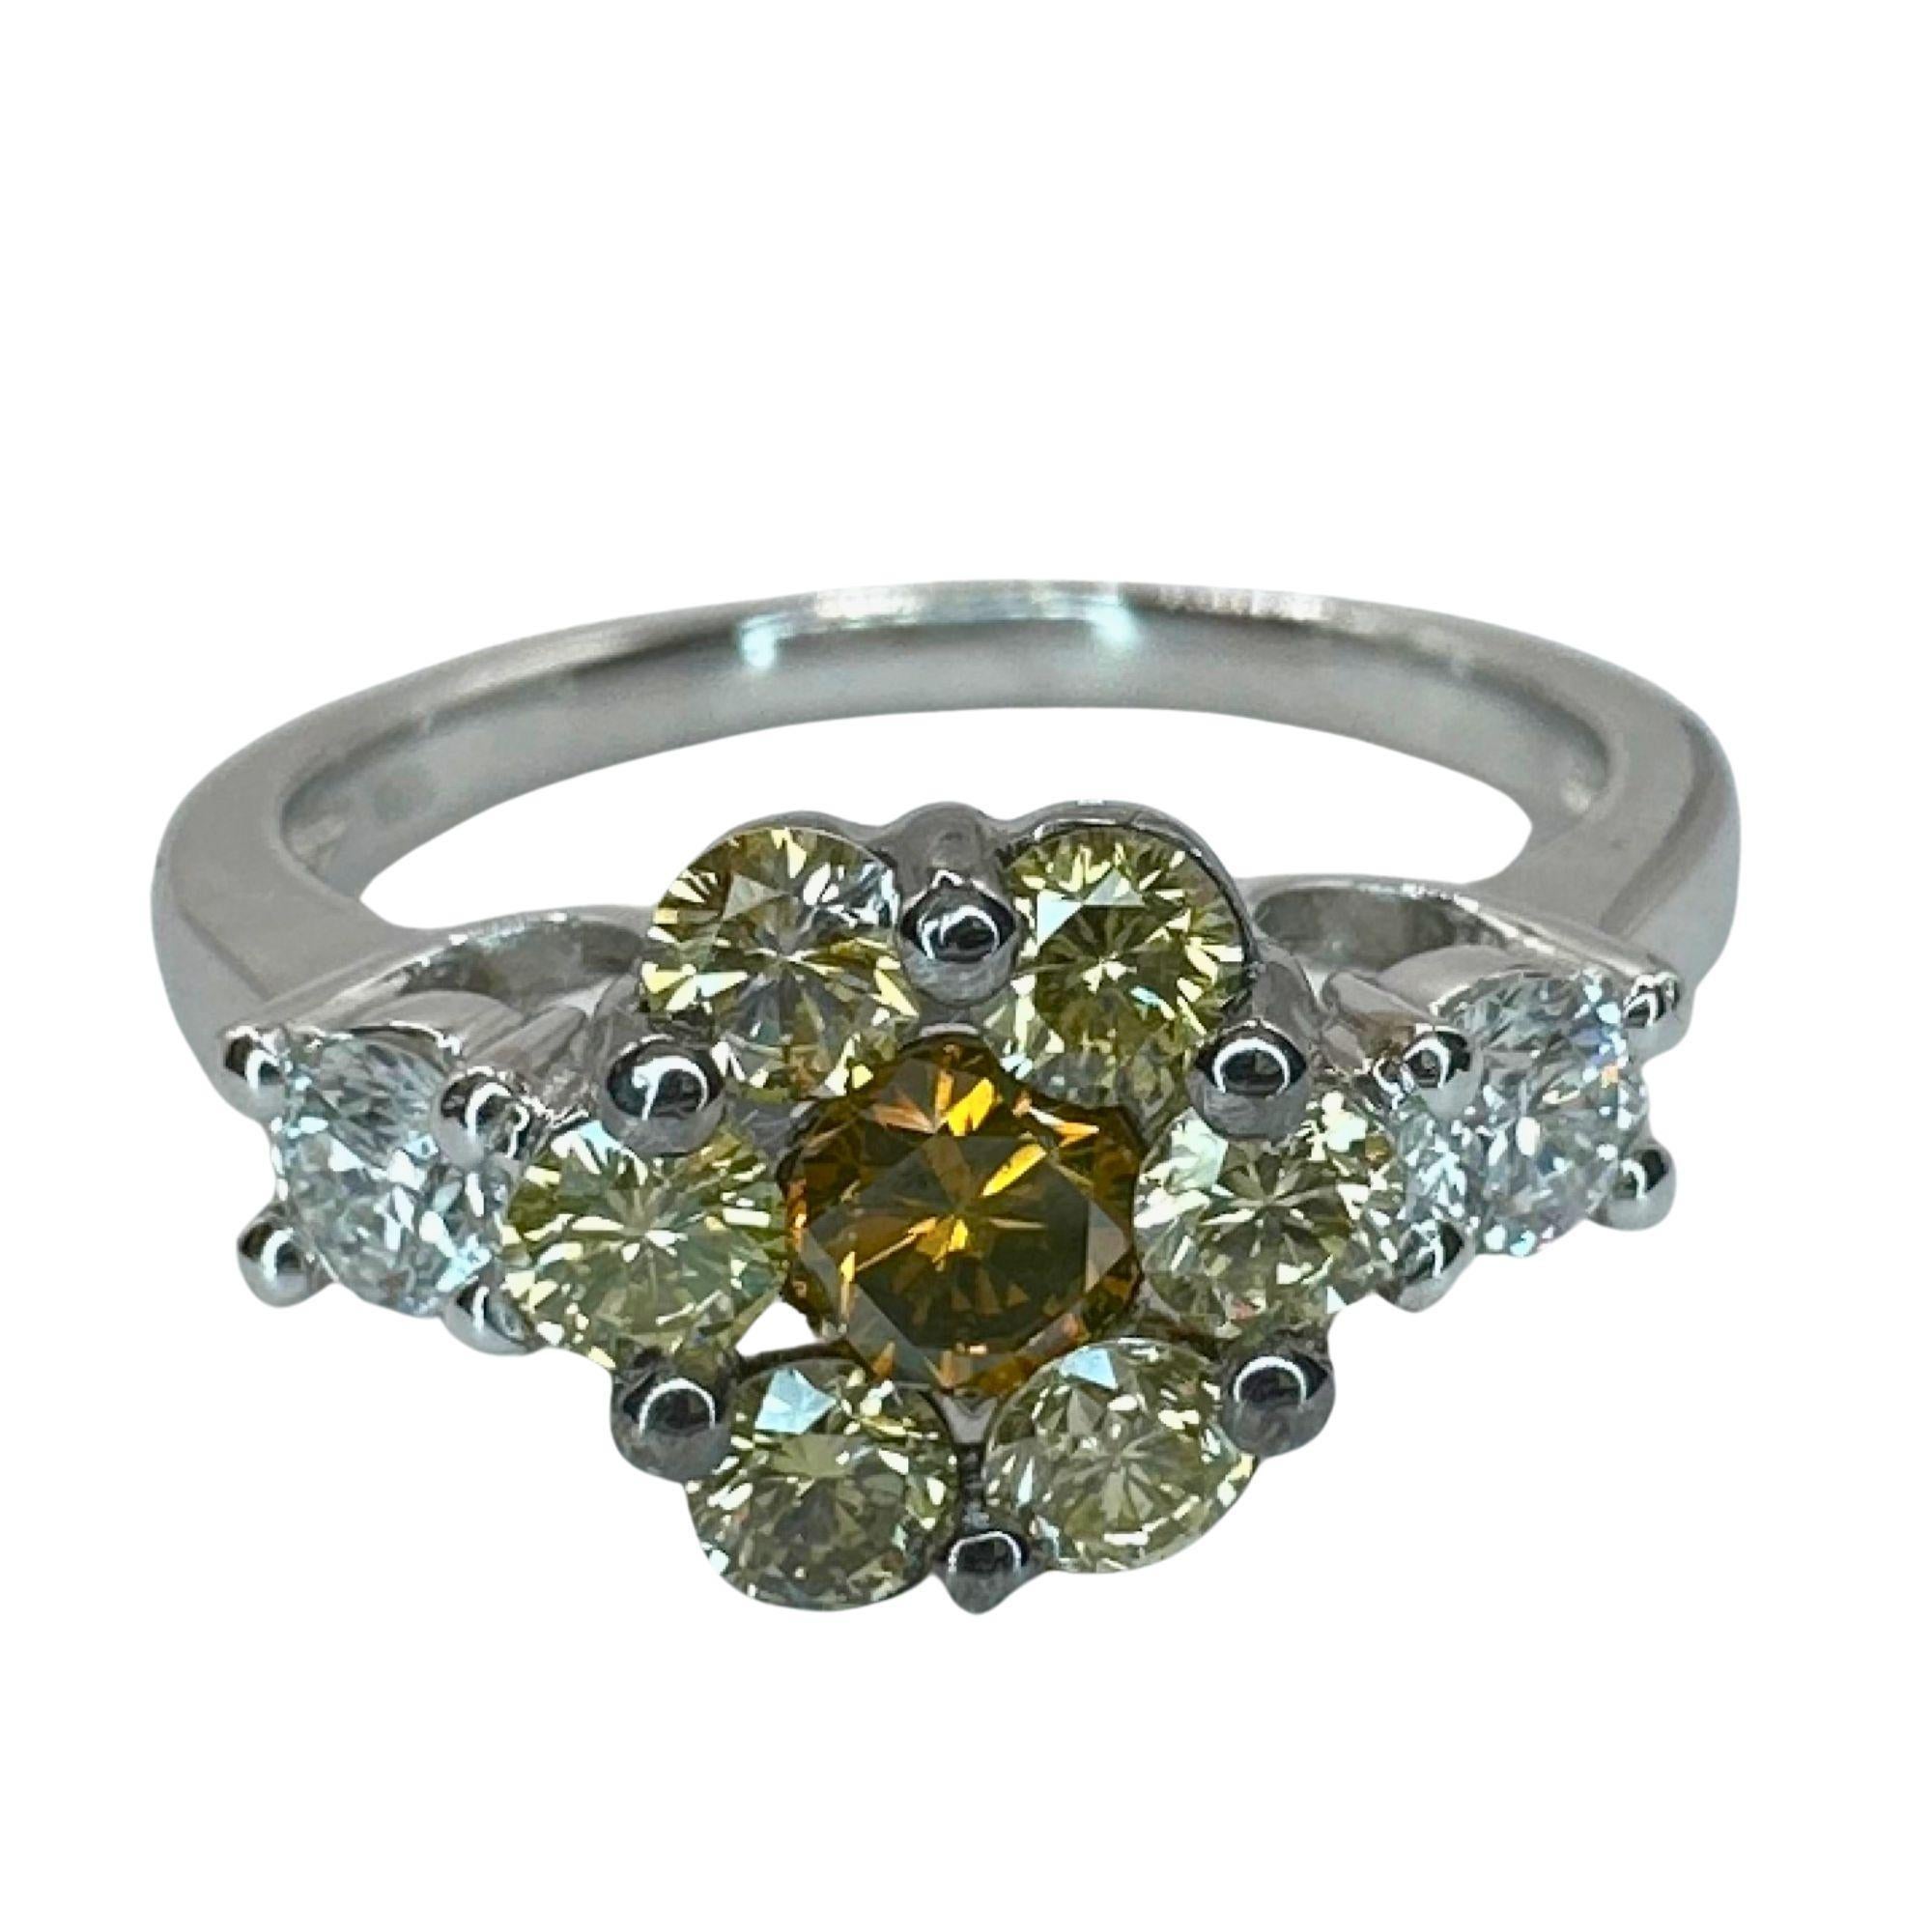 This cute 18k white and yellow diamond flower ring weighs 4.70 grams and features 0.26 carats of white diamonds and 0.80 carats of yellow diamonds. In good condition, it showcases intricate markings and a size 7.75 band. Perfect for adding some